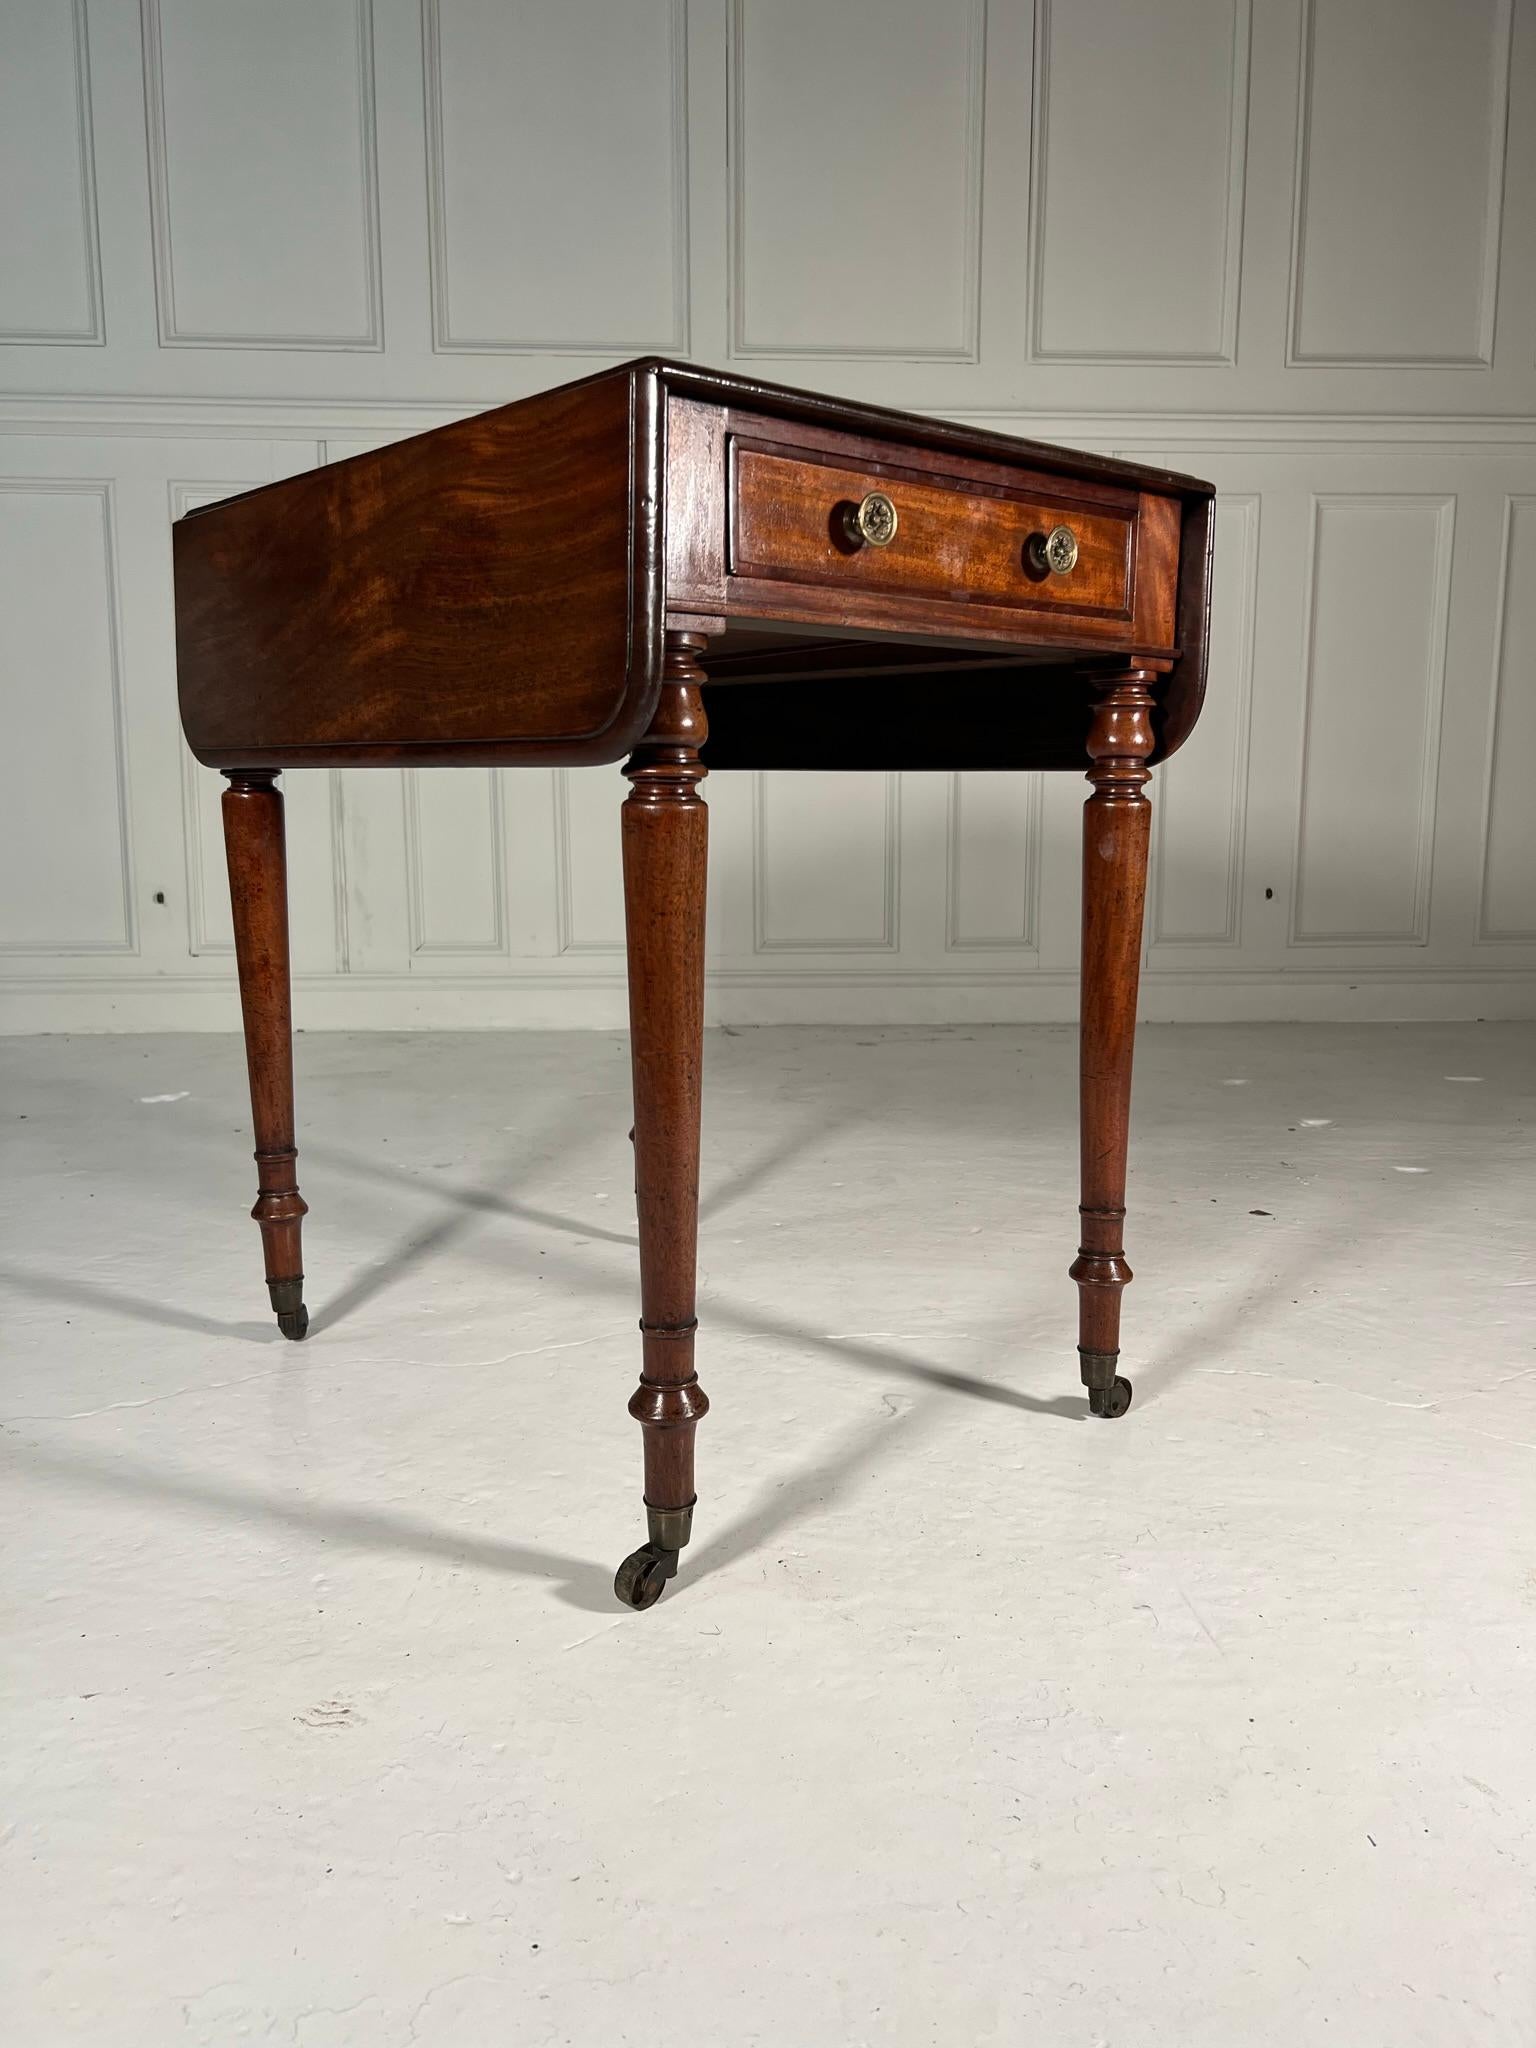 19th Century Mahogany Pembroke Table.

Fine turned legs terminating on brass castors.

Nice clean example.

English C1860

Measurements - 73cm h x 52cm w (closed) / 90cm w (open) x 69cm d
(measurements are approximate and are taken at the